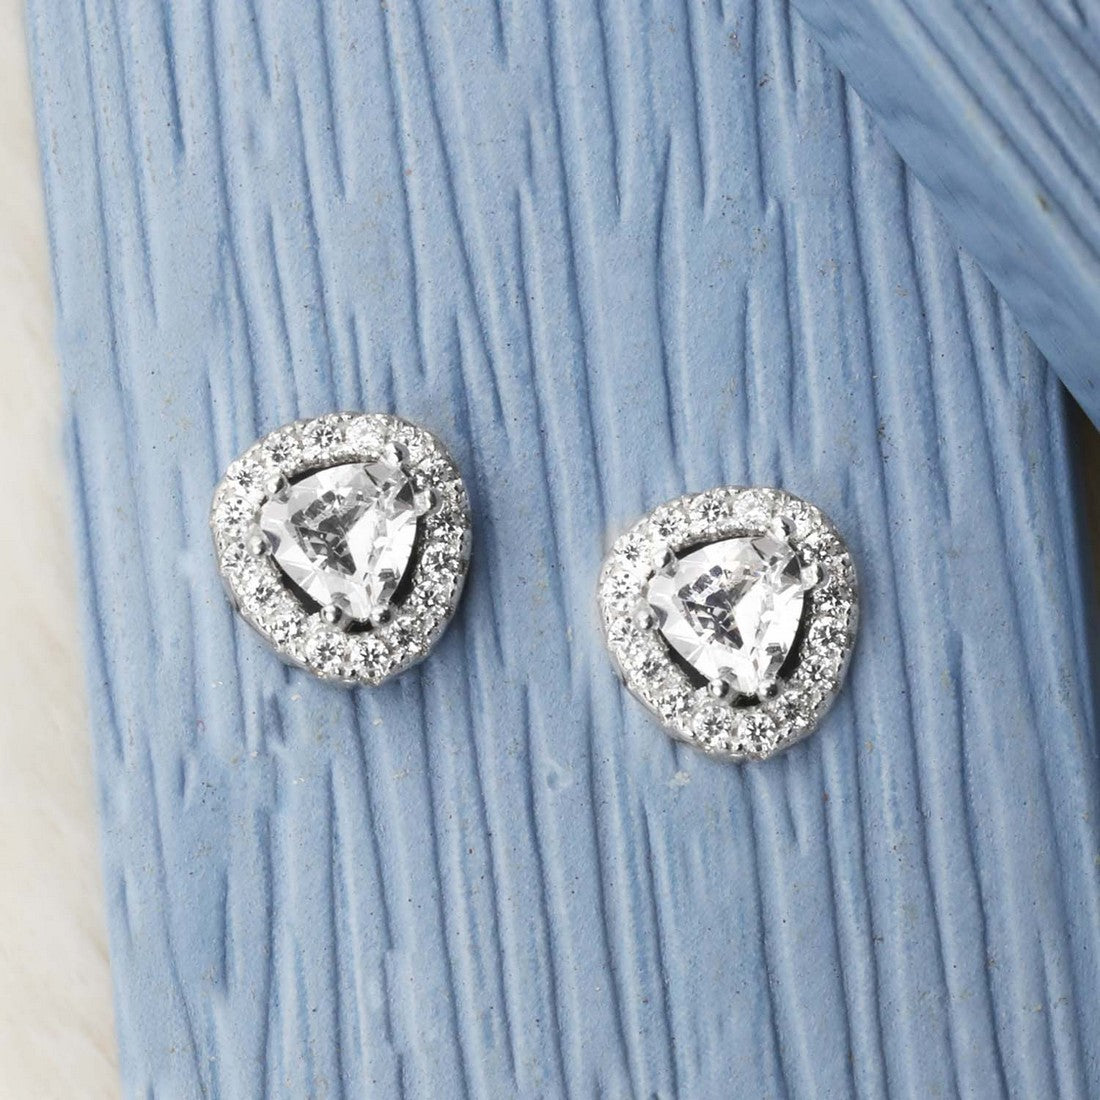 Angelic Solitaire Stud 925 Silver Earrings